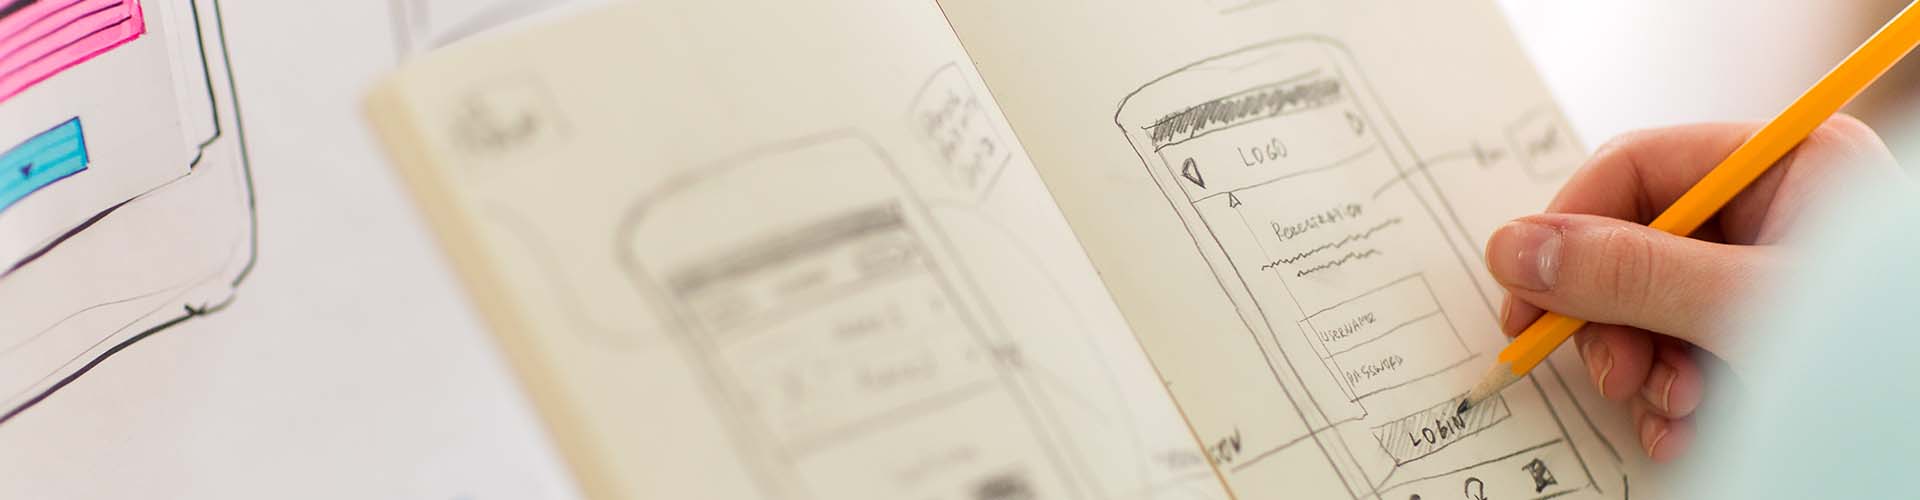 Discovering the User's Needs with UX Research